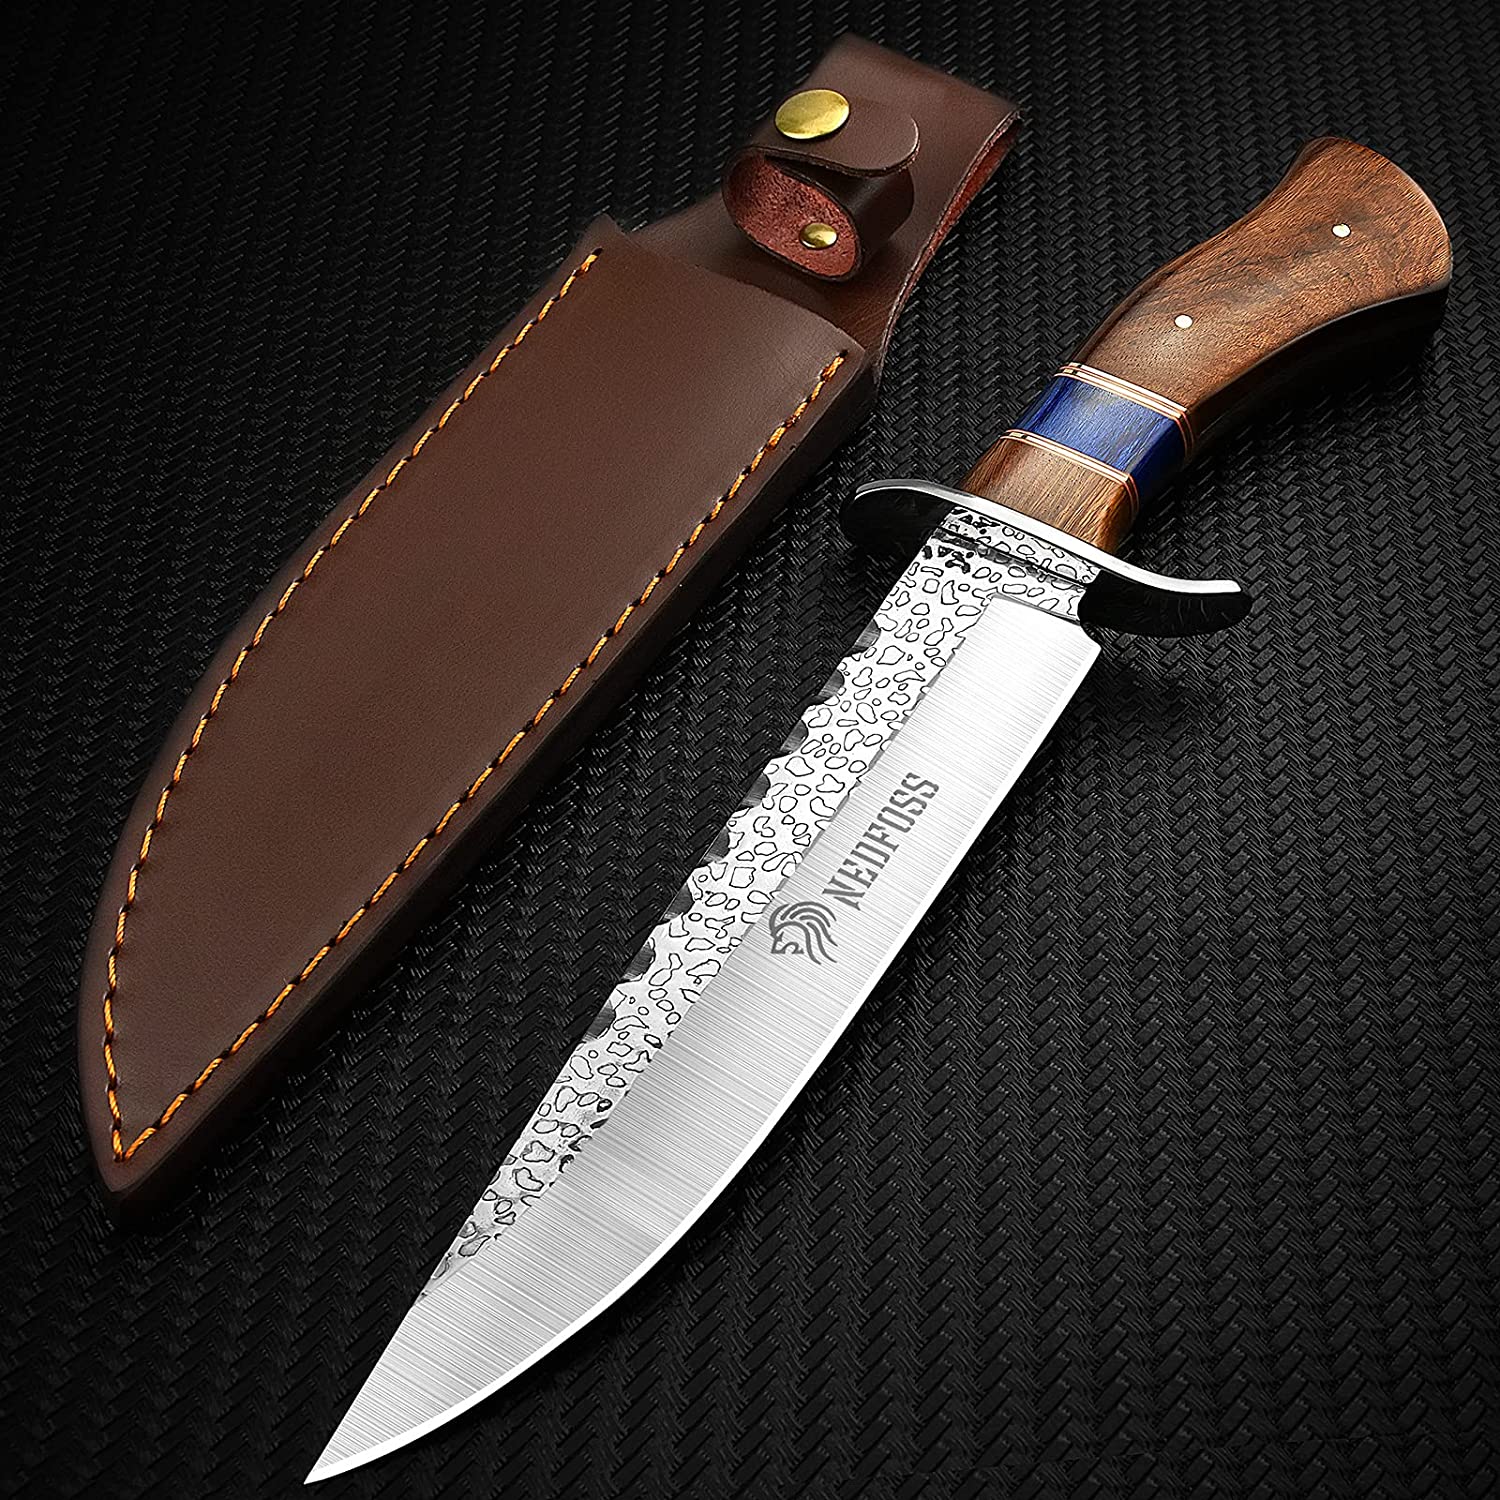 NedFoss Fixed Blade Hunting Knife with Leather Sheath, 12-inch Survival Knife with Wood Handle, Camping Knife with Sharpest 440C, Cool Knives for men, for Outdoor, Camping, Hiking